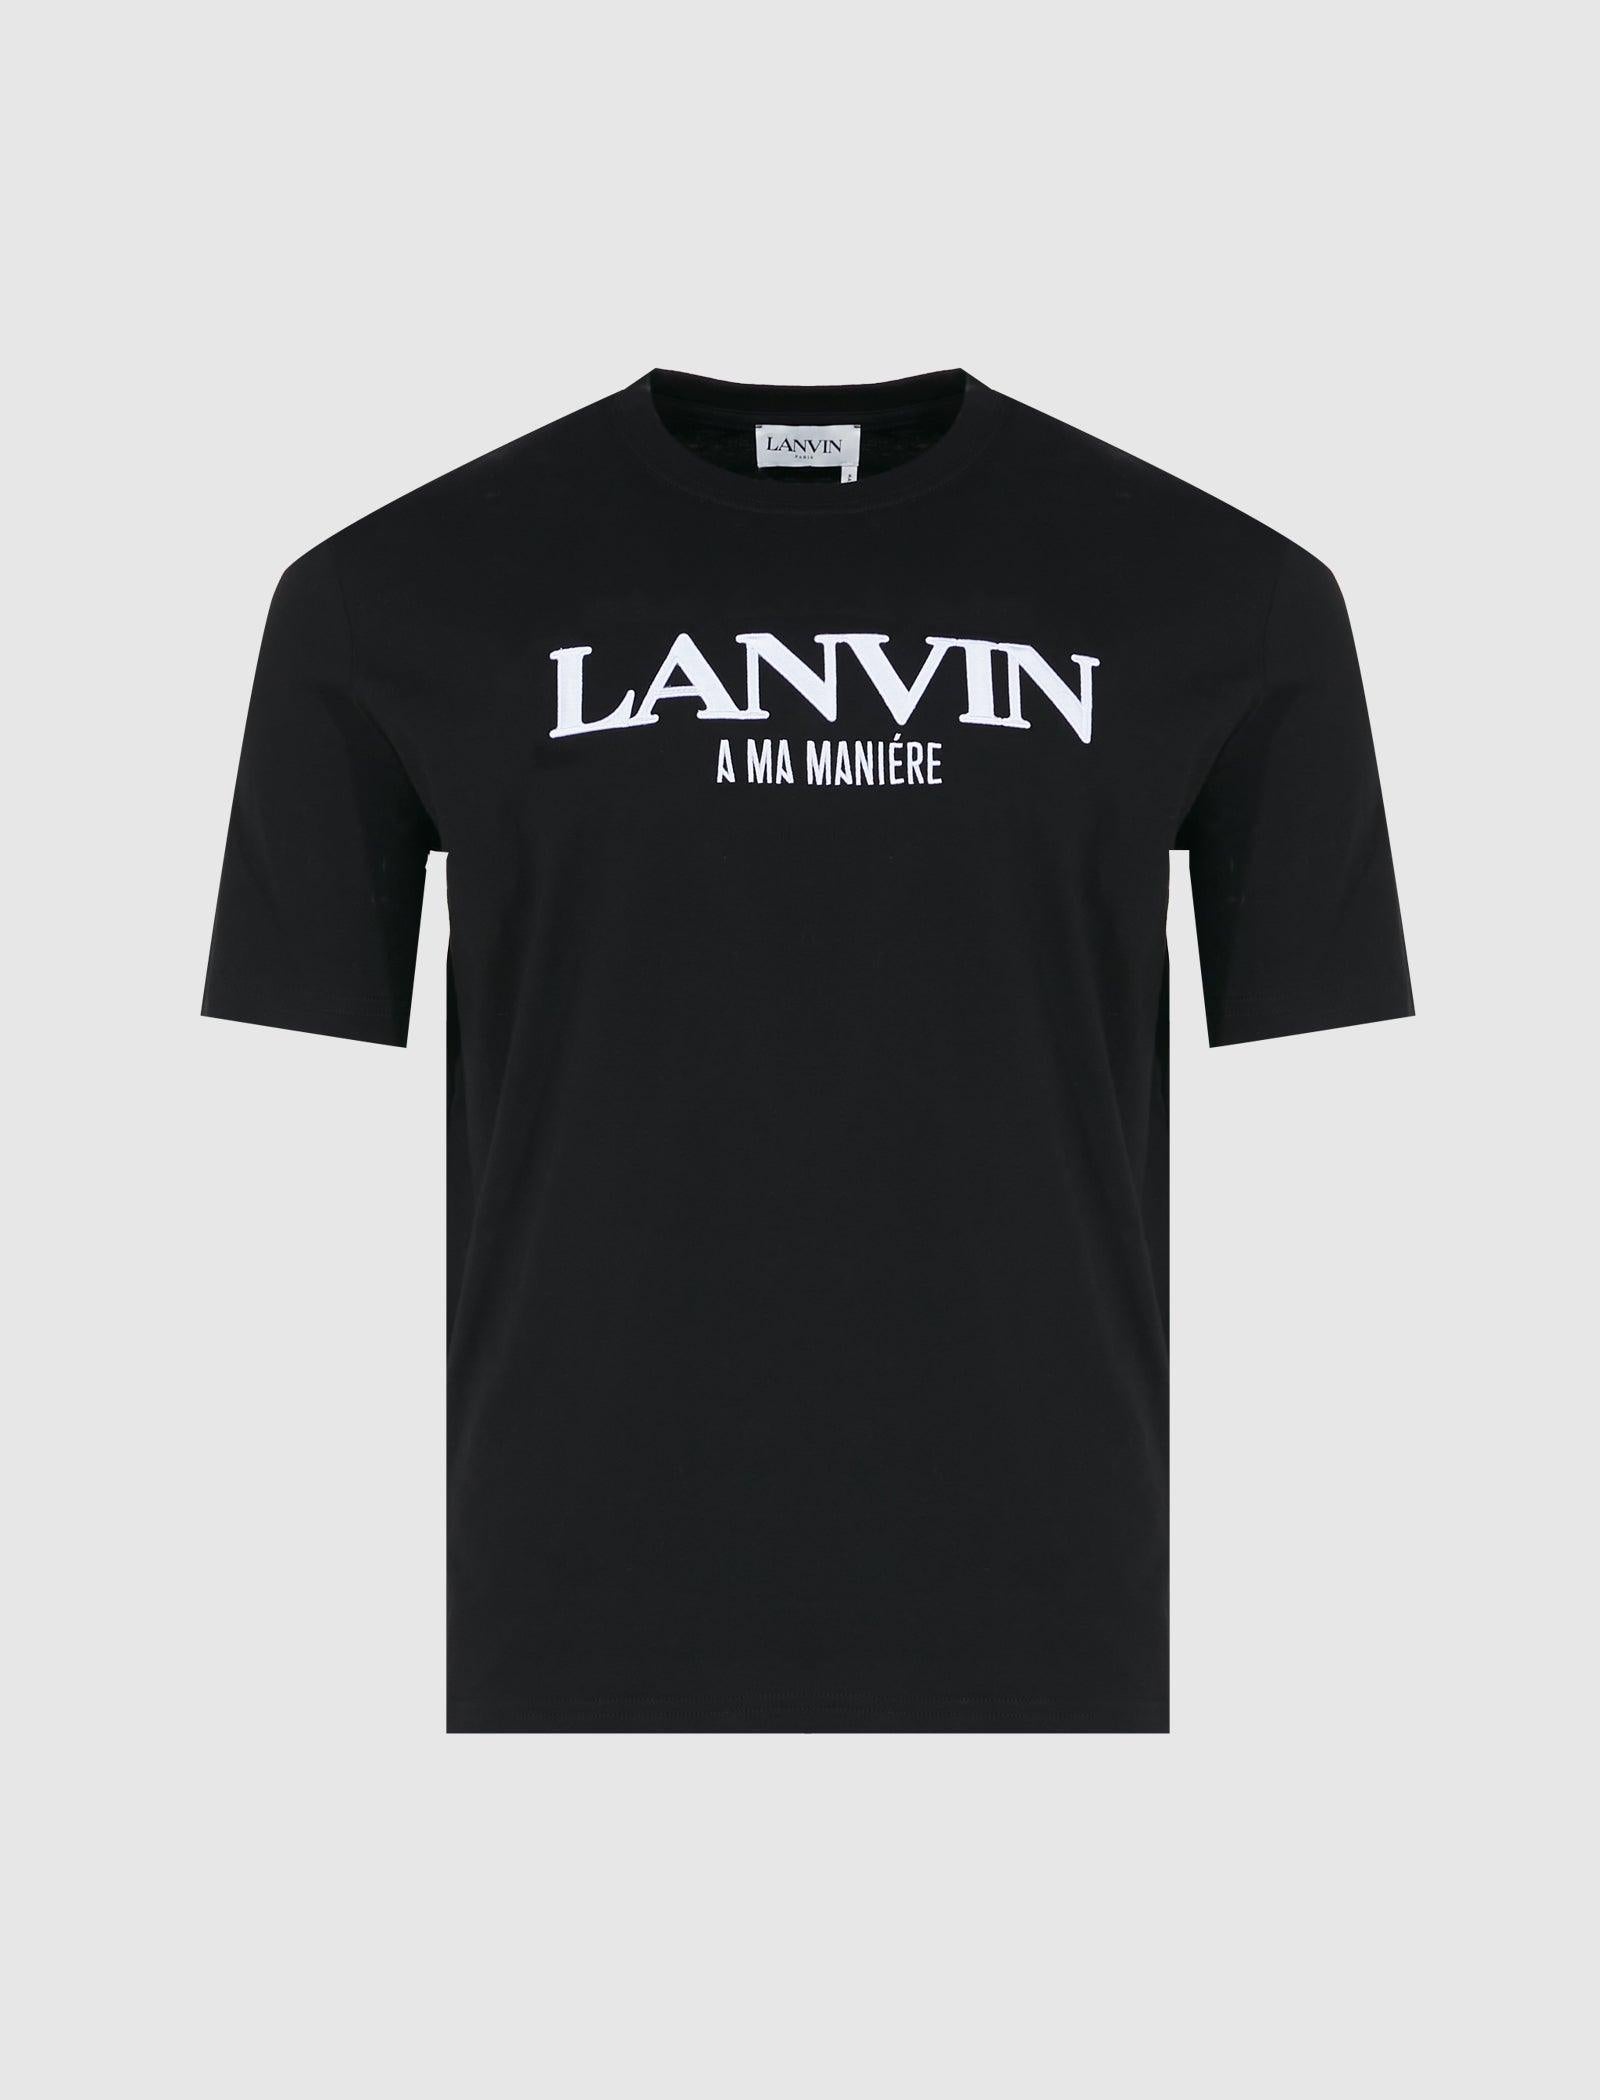 LANVIN x A MA MANIÉRE EMBROIDERED TEE – A Ma Maniere